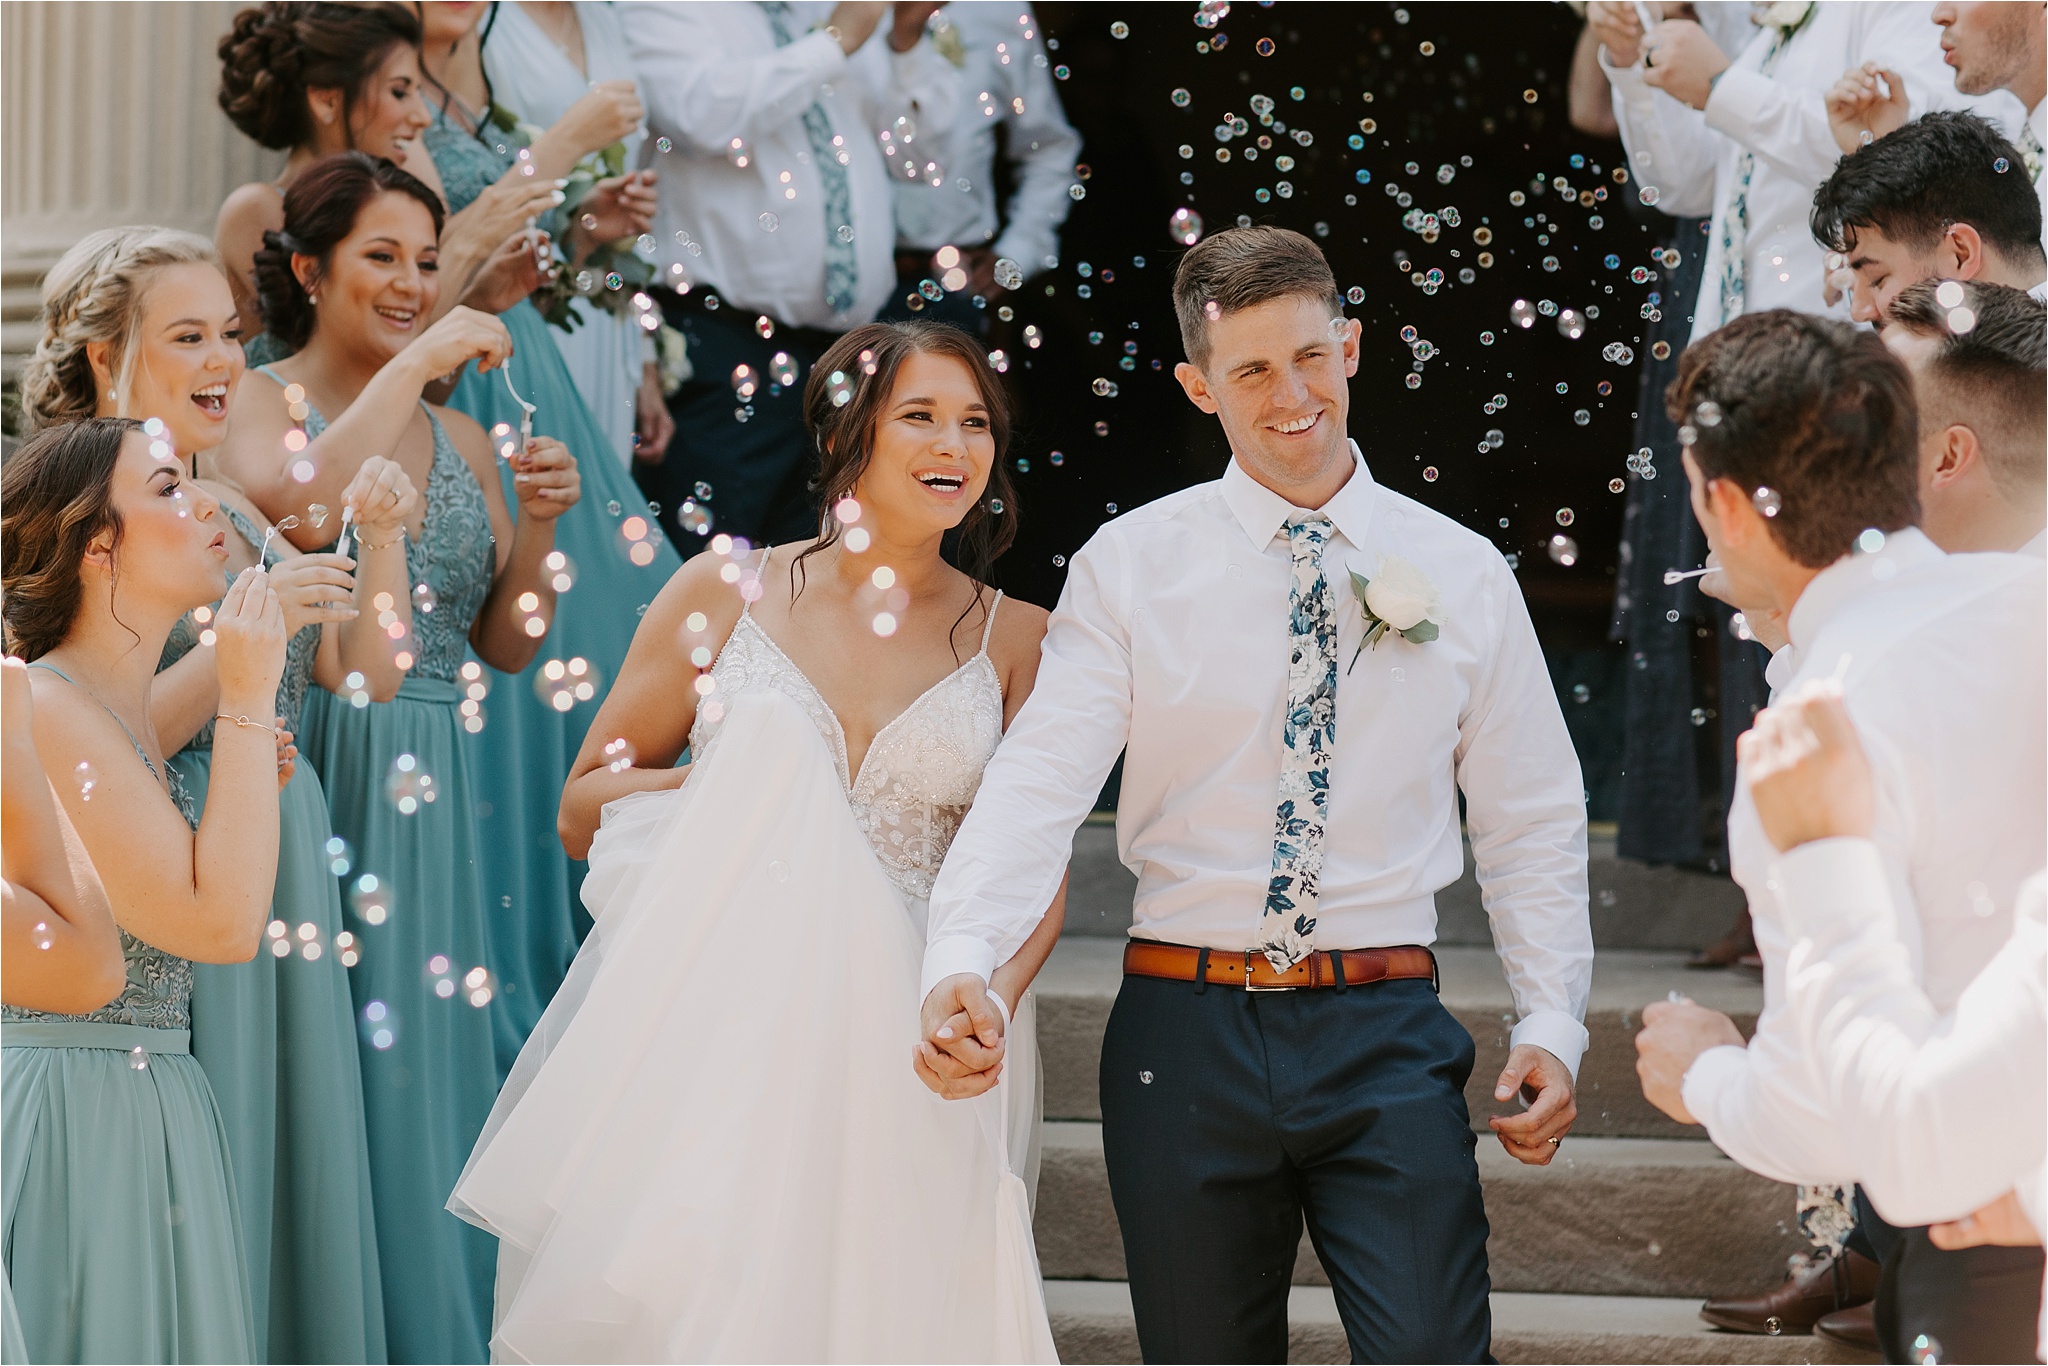 Bubble Exit from Ceremony